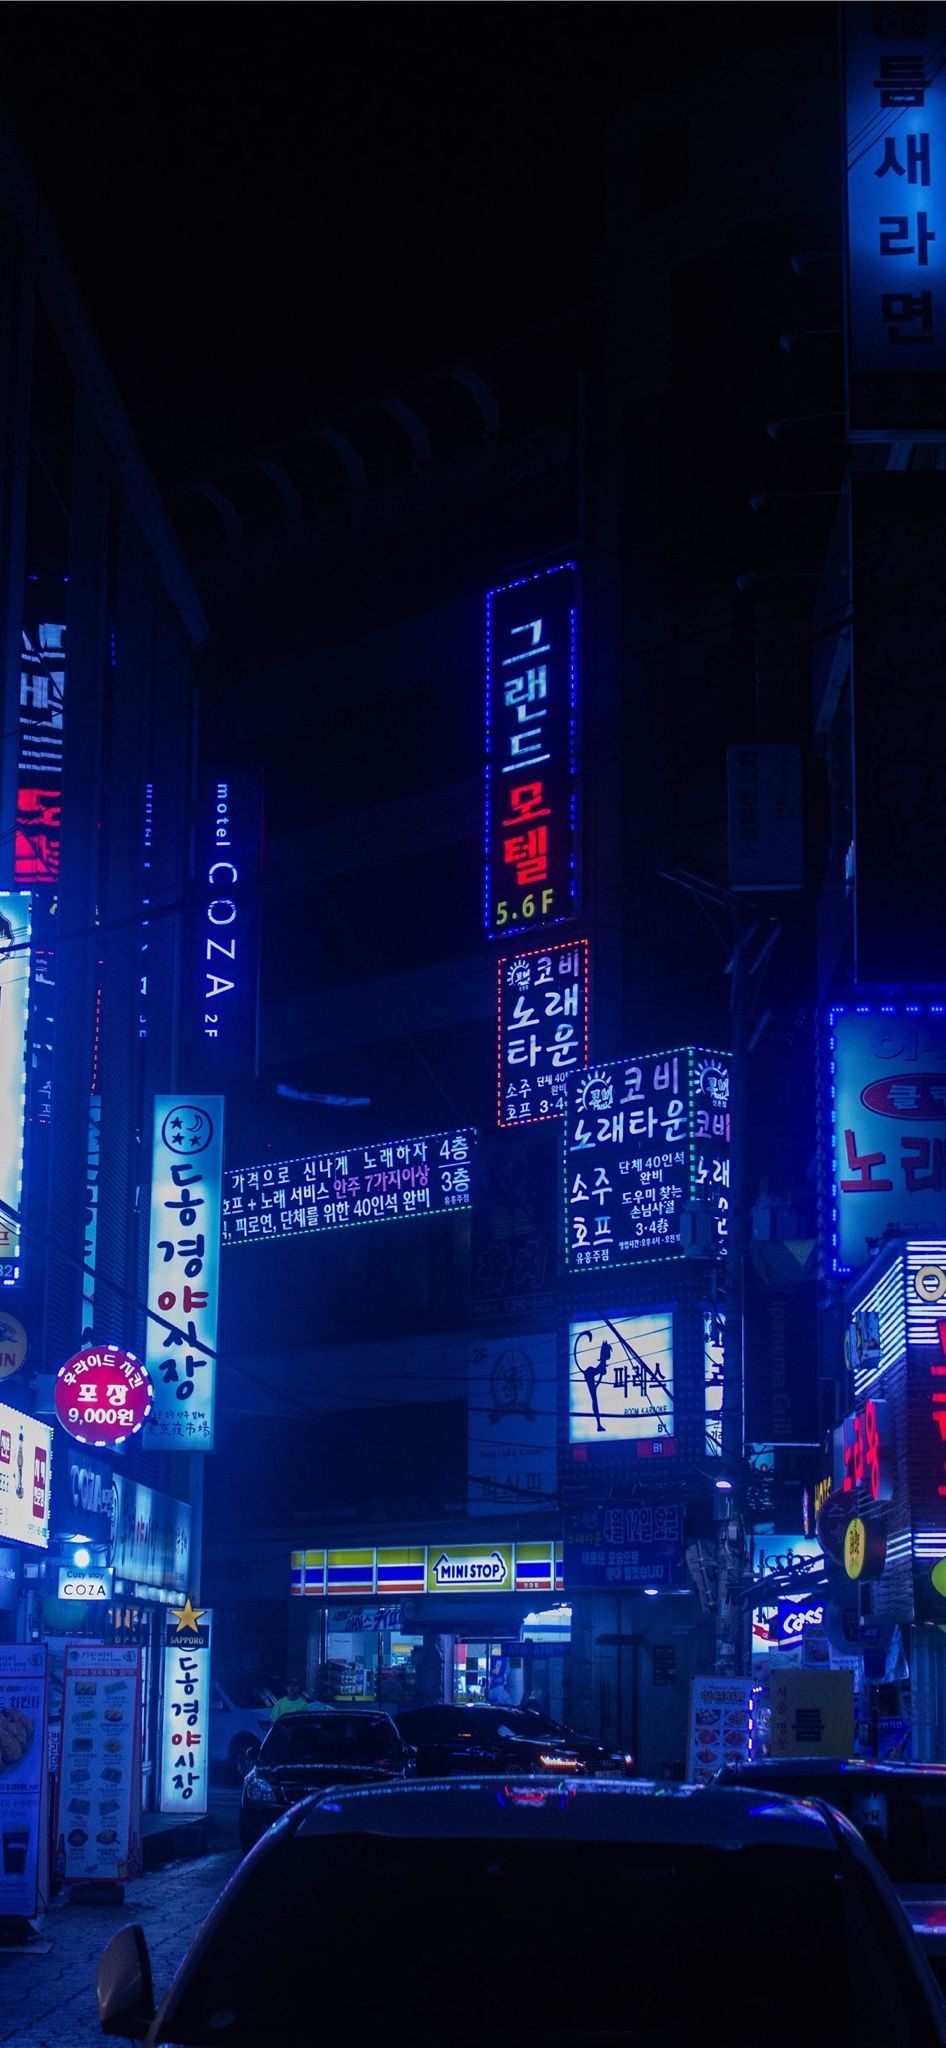 Tokyo Aesthetic Theme Wallpapers - Wallpaper Cave